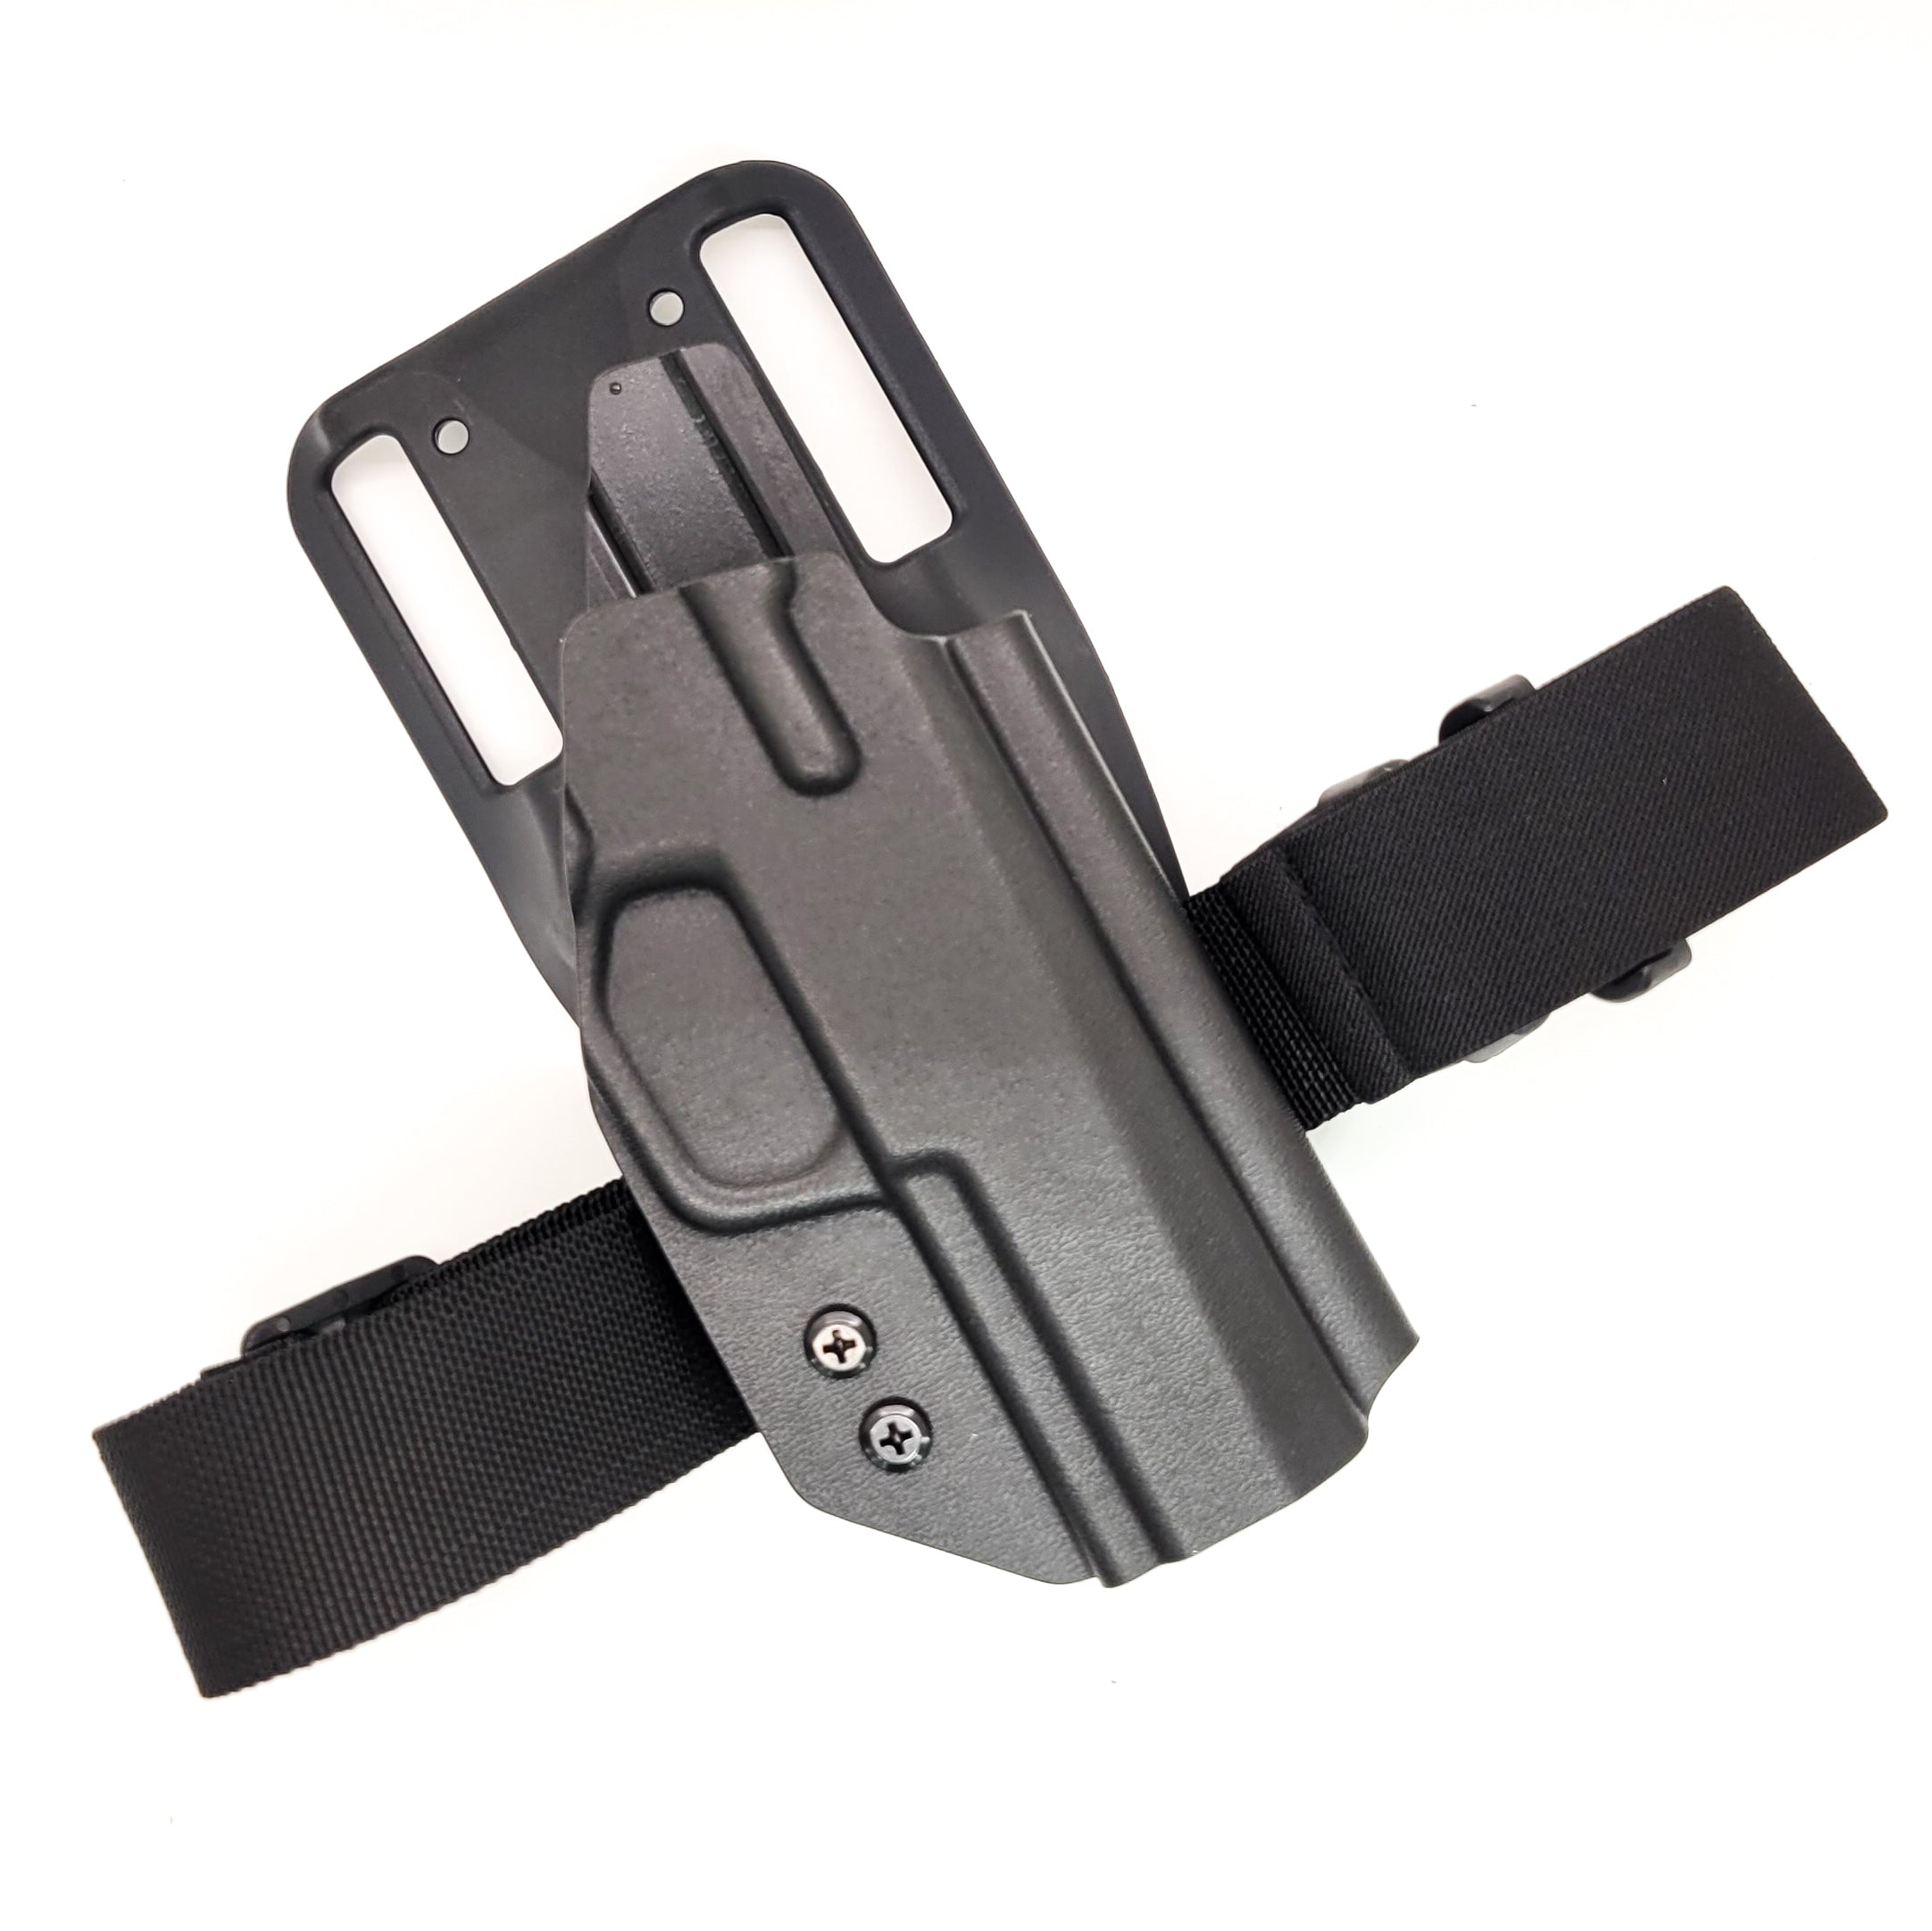 For the best Outside Waistband Duty & Competition Kydex Holster designed to fit the Sig Sauer P365-XMACRO, P365-XMACRO COMP, P365-XMACRO TACOPS, and P365-XMACRO COMP ROMEOZERO ELITE handgun, shop Four Brothers Holsters.  Full sweat guard, adjustable retention, Open muzzle for threaded barrels, cleared for red dot sight